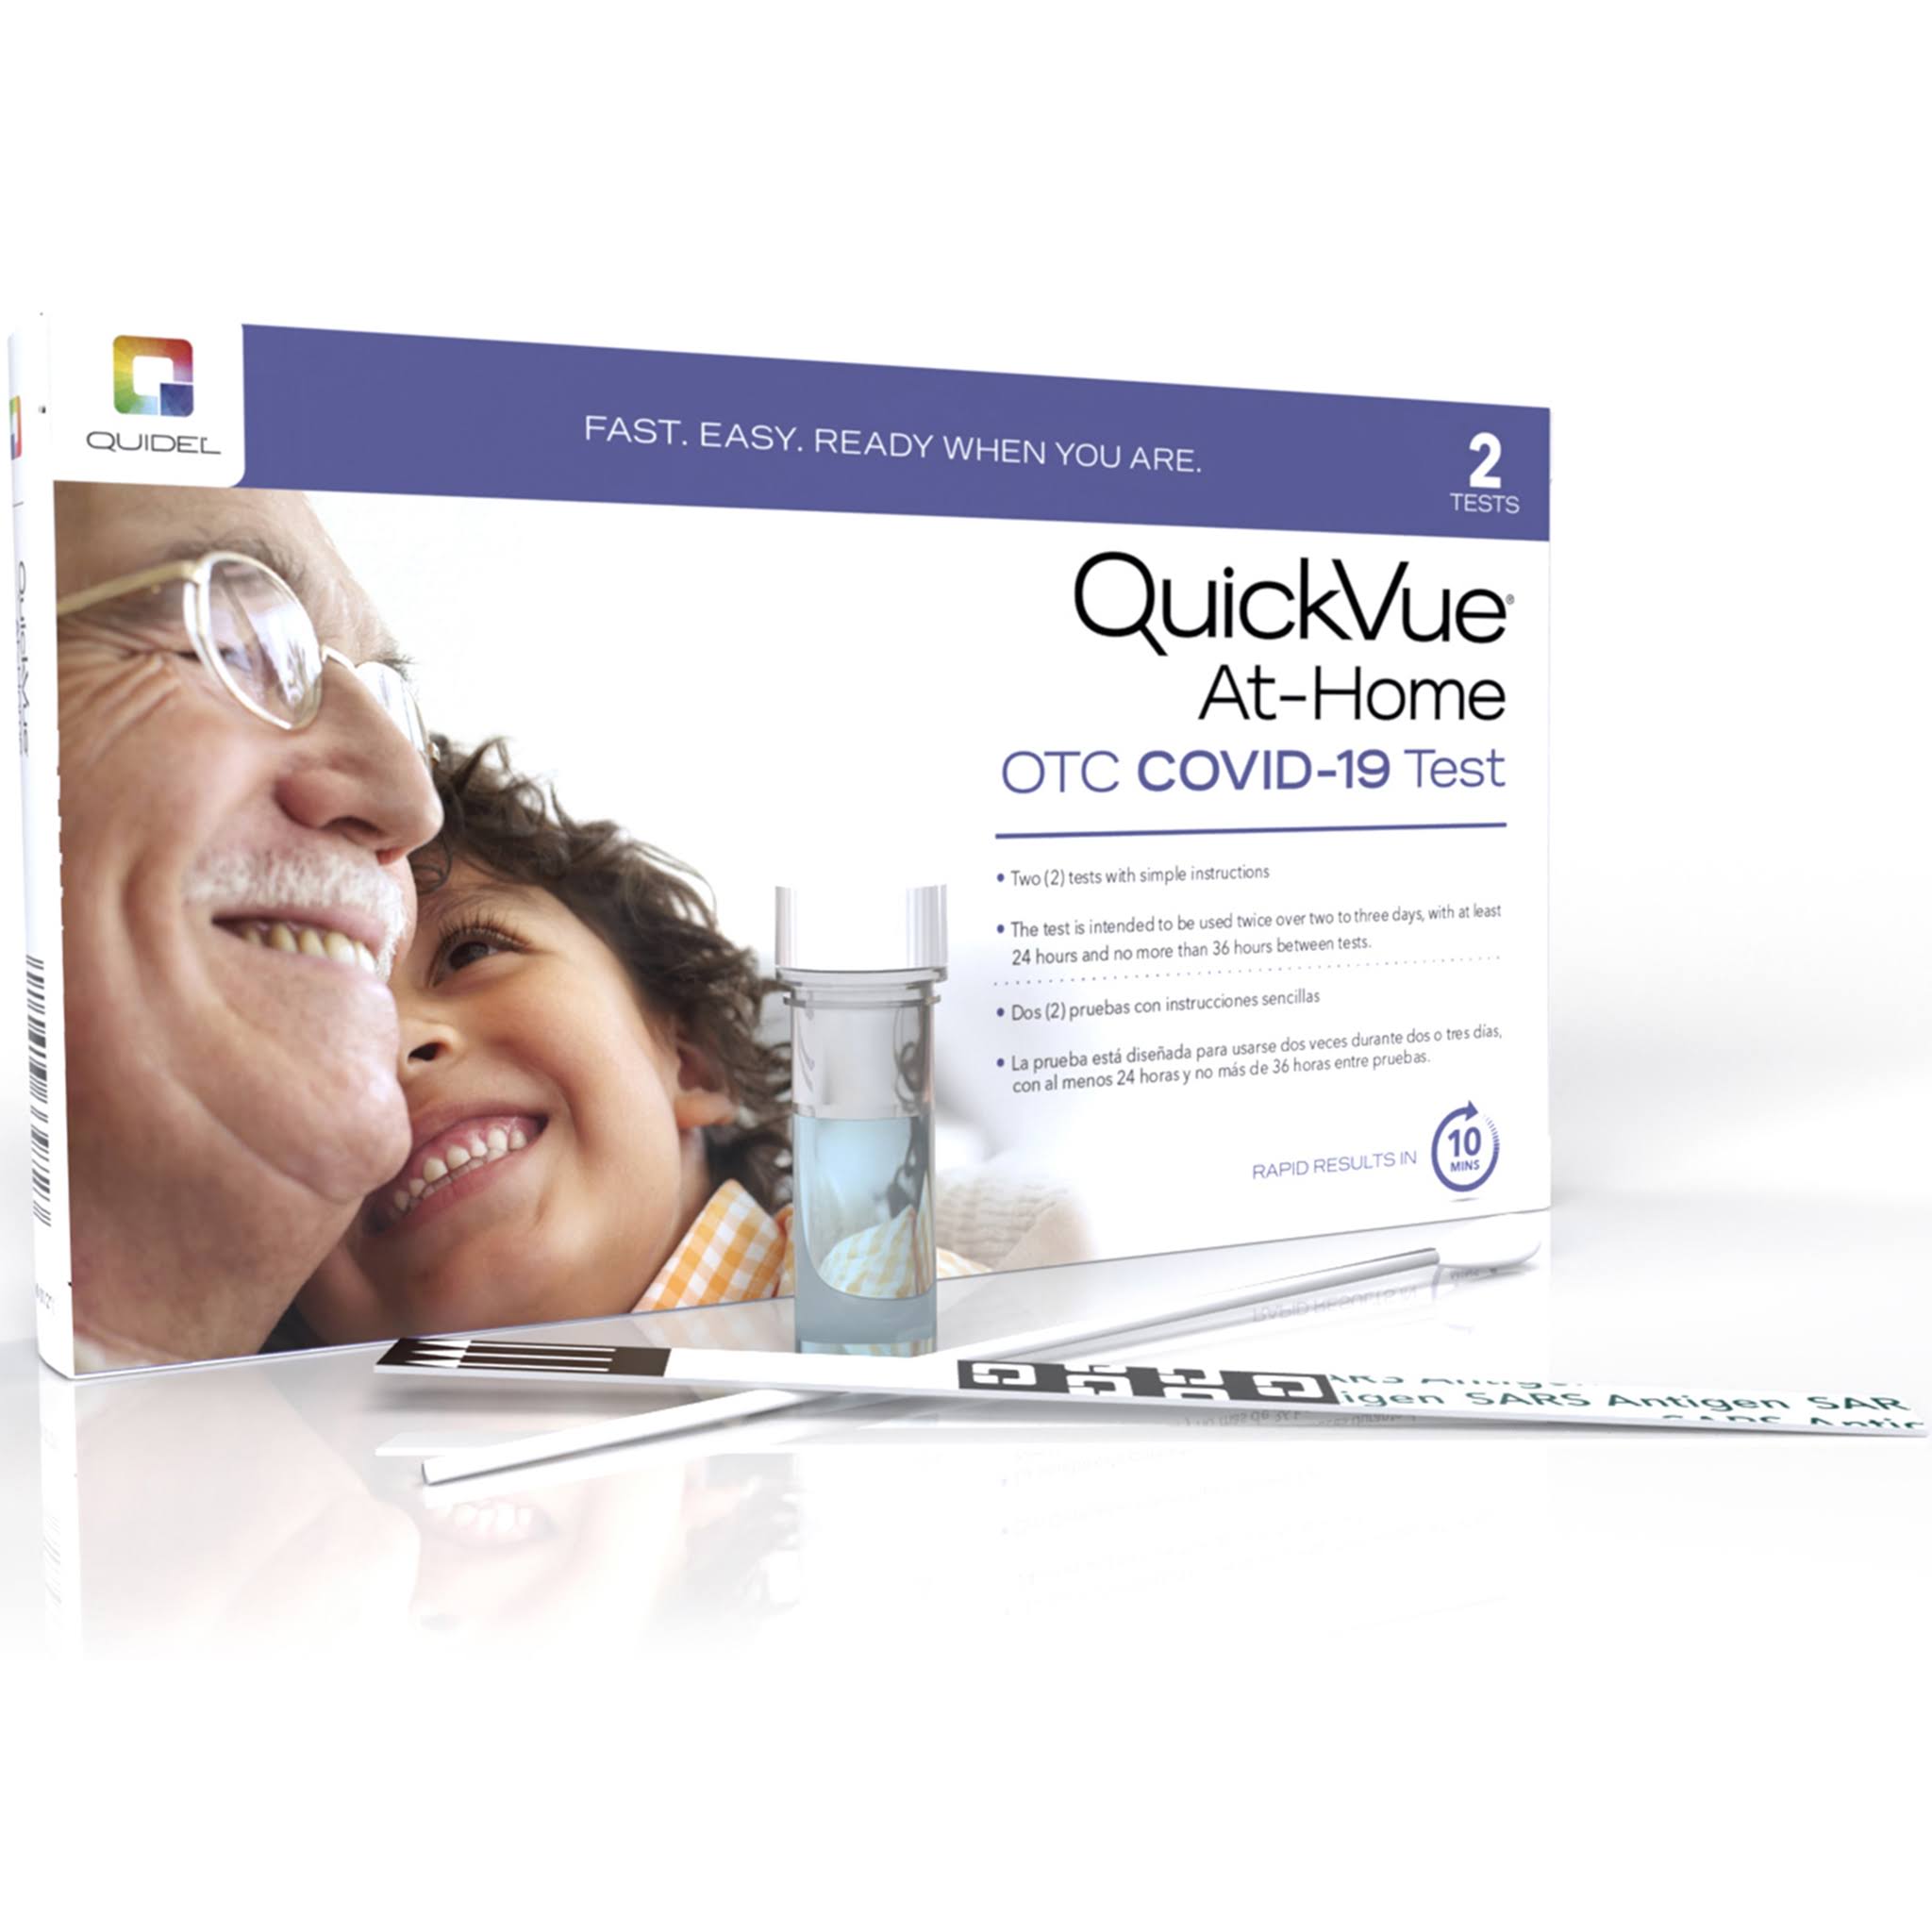 Quidel QuickVue at-Home OTC COVID-19 Test Kit, Self-Collected Nasal Swab Sample, 10 Minute Rapid Results - Single Kit